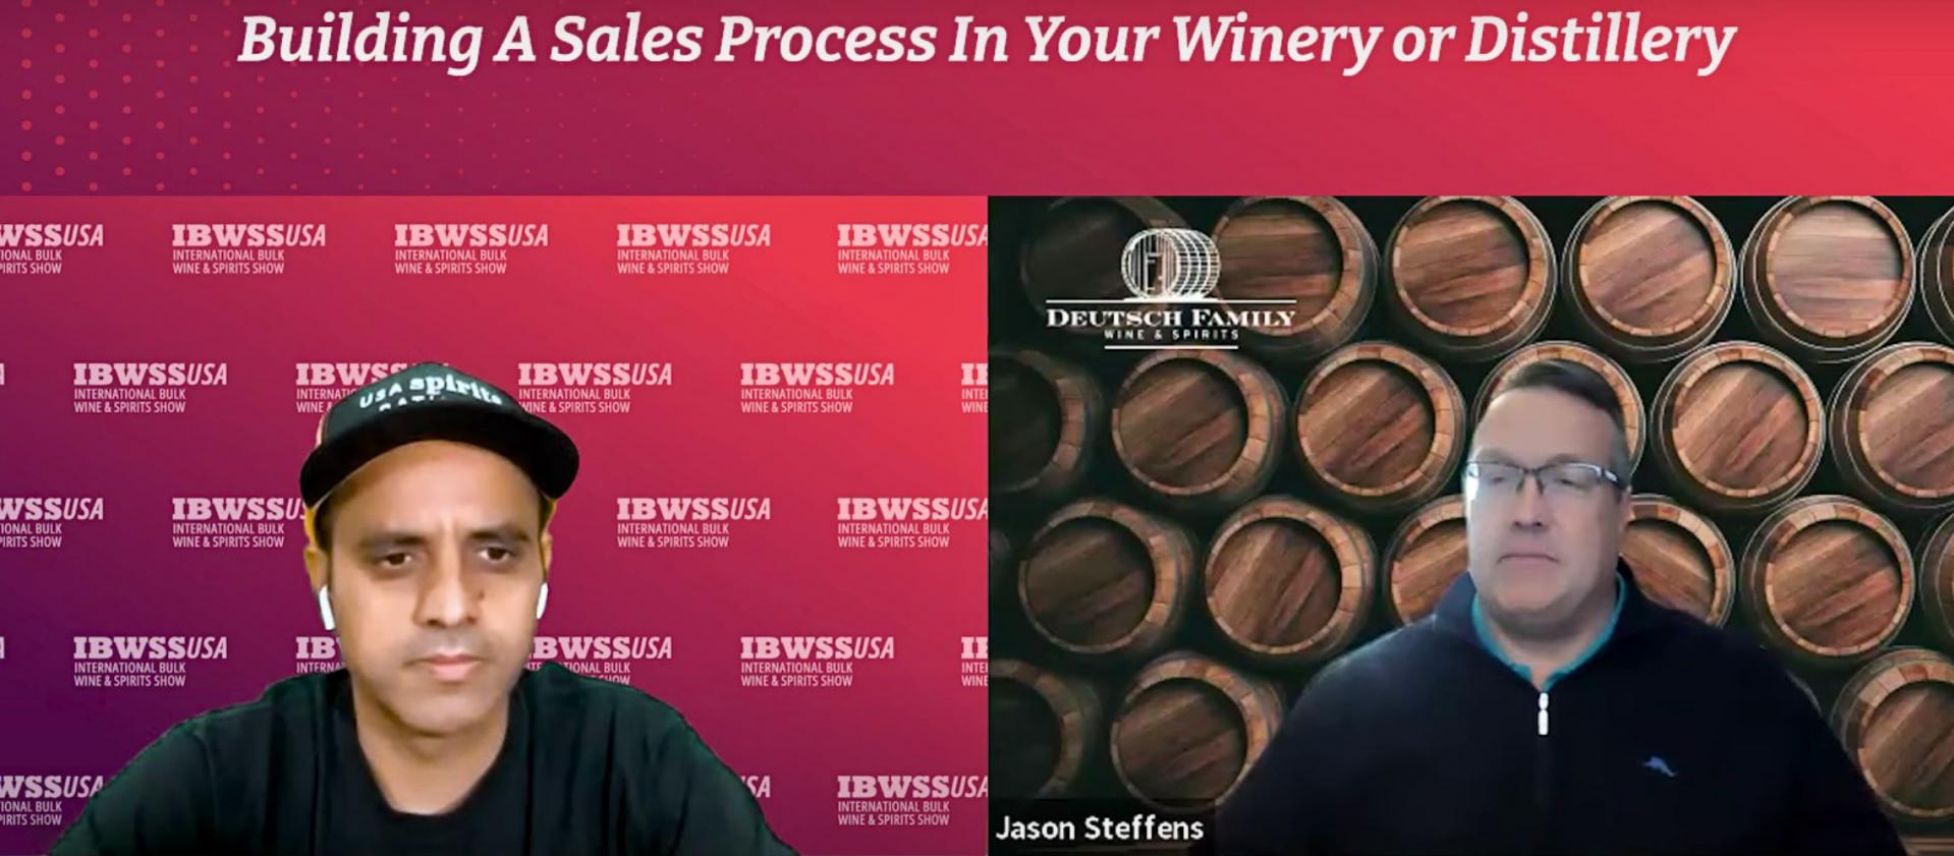 Photo for: Building A Sales Process In Your Winery or Distillery